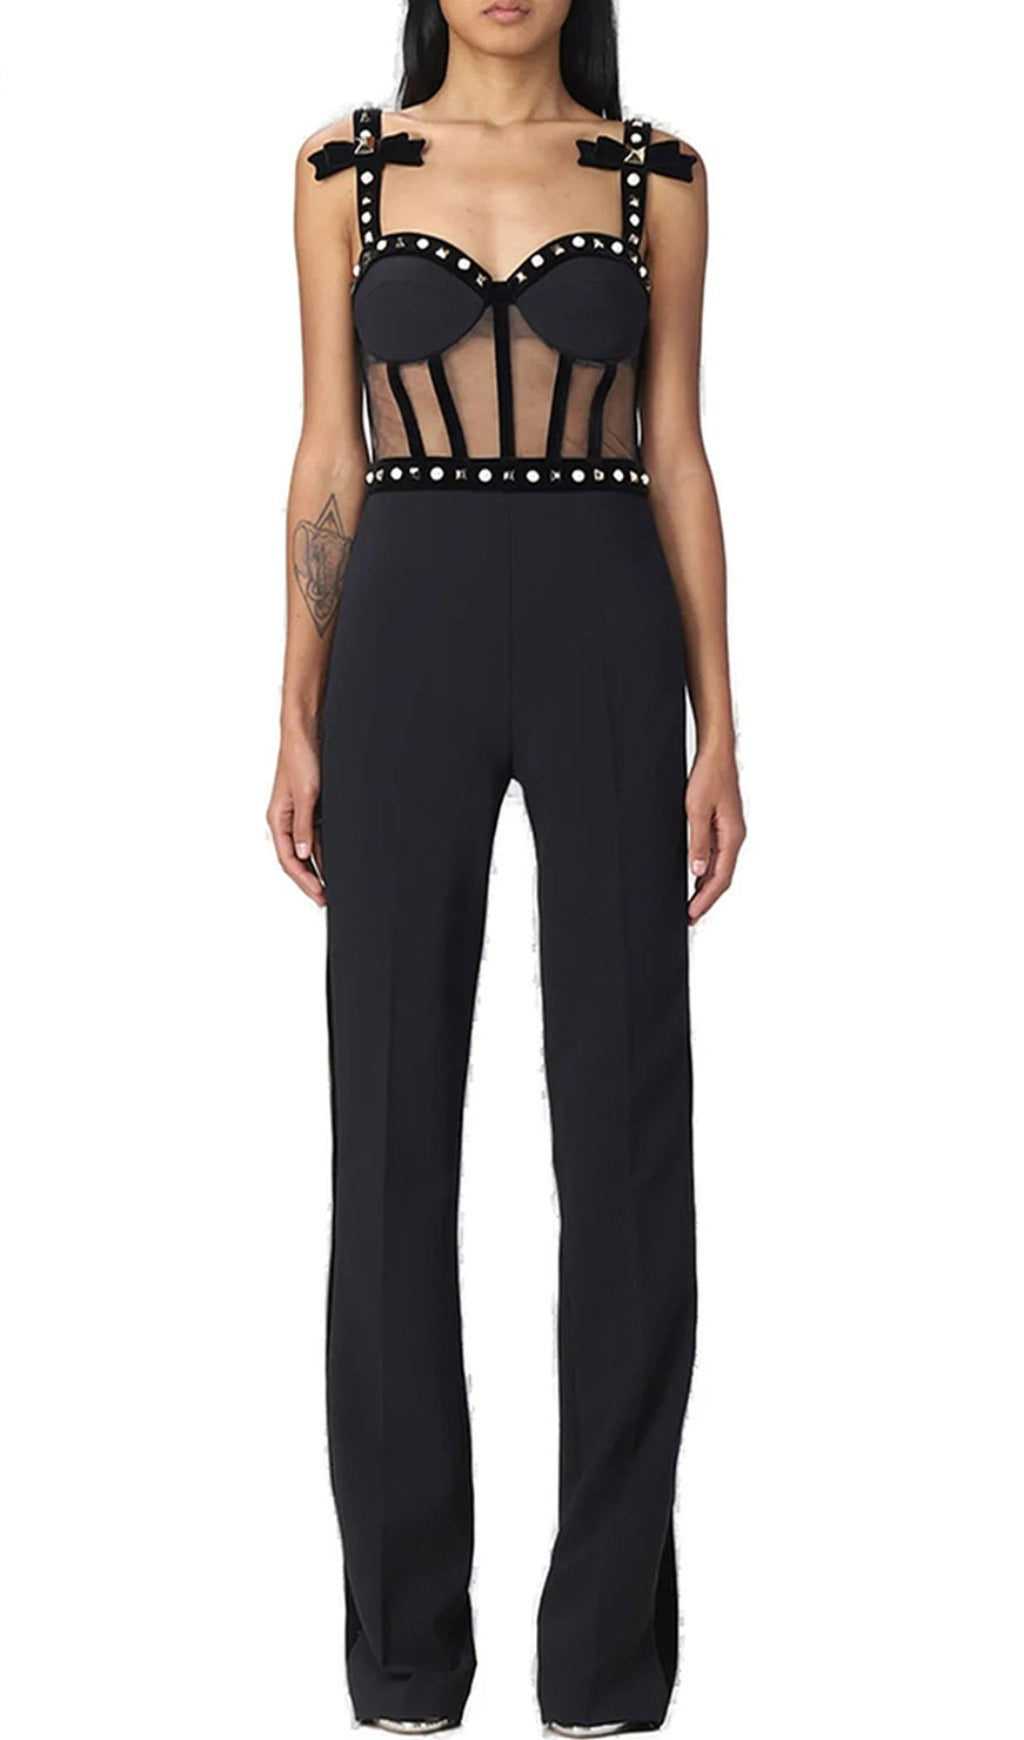 Strappy Beaded Mesh Jumpsuit